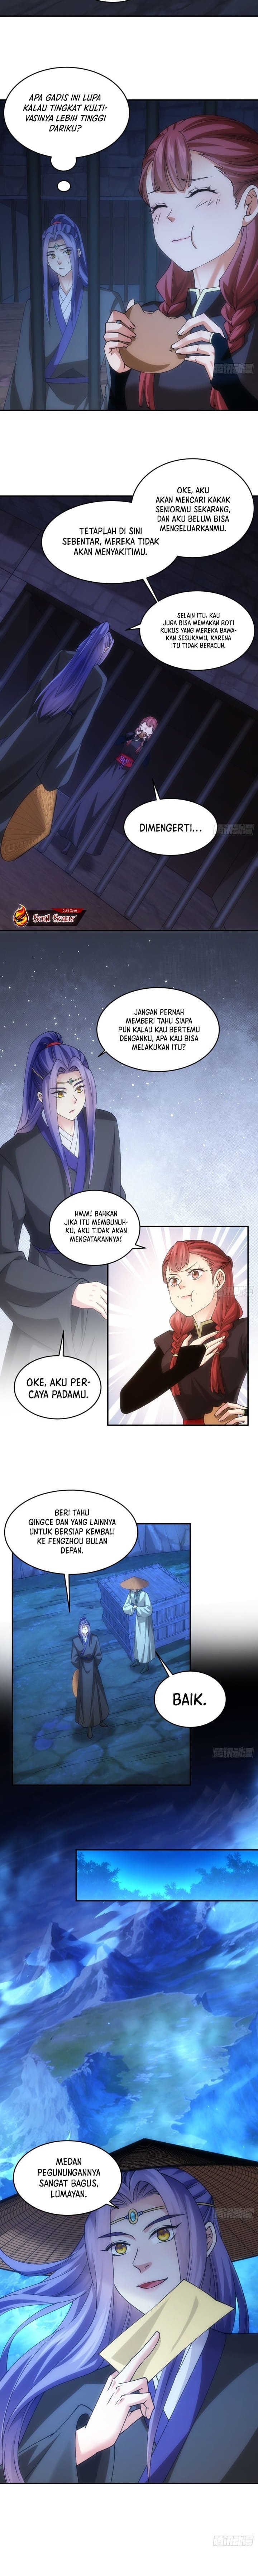 Dilarang COPAS - situs resmi www.mangacanblog.com - Komik i just dont play the card according to the routine 146 - chapter 146 147 Indonesia i just dont play the card according to the routine 146 - chapter 146 Terbaru 2|Baca Manga Komik Indonesia|Mangacan